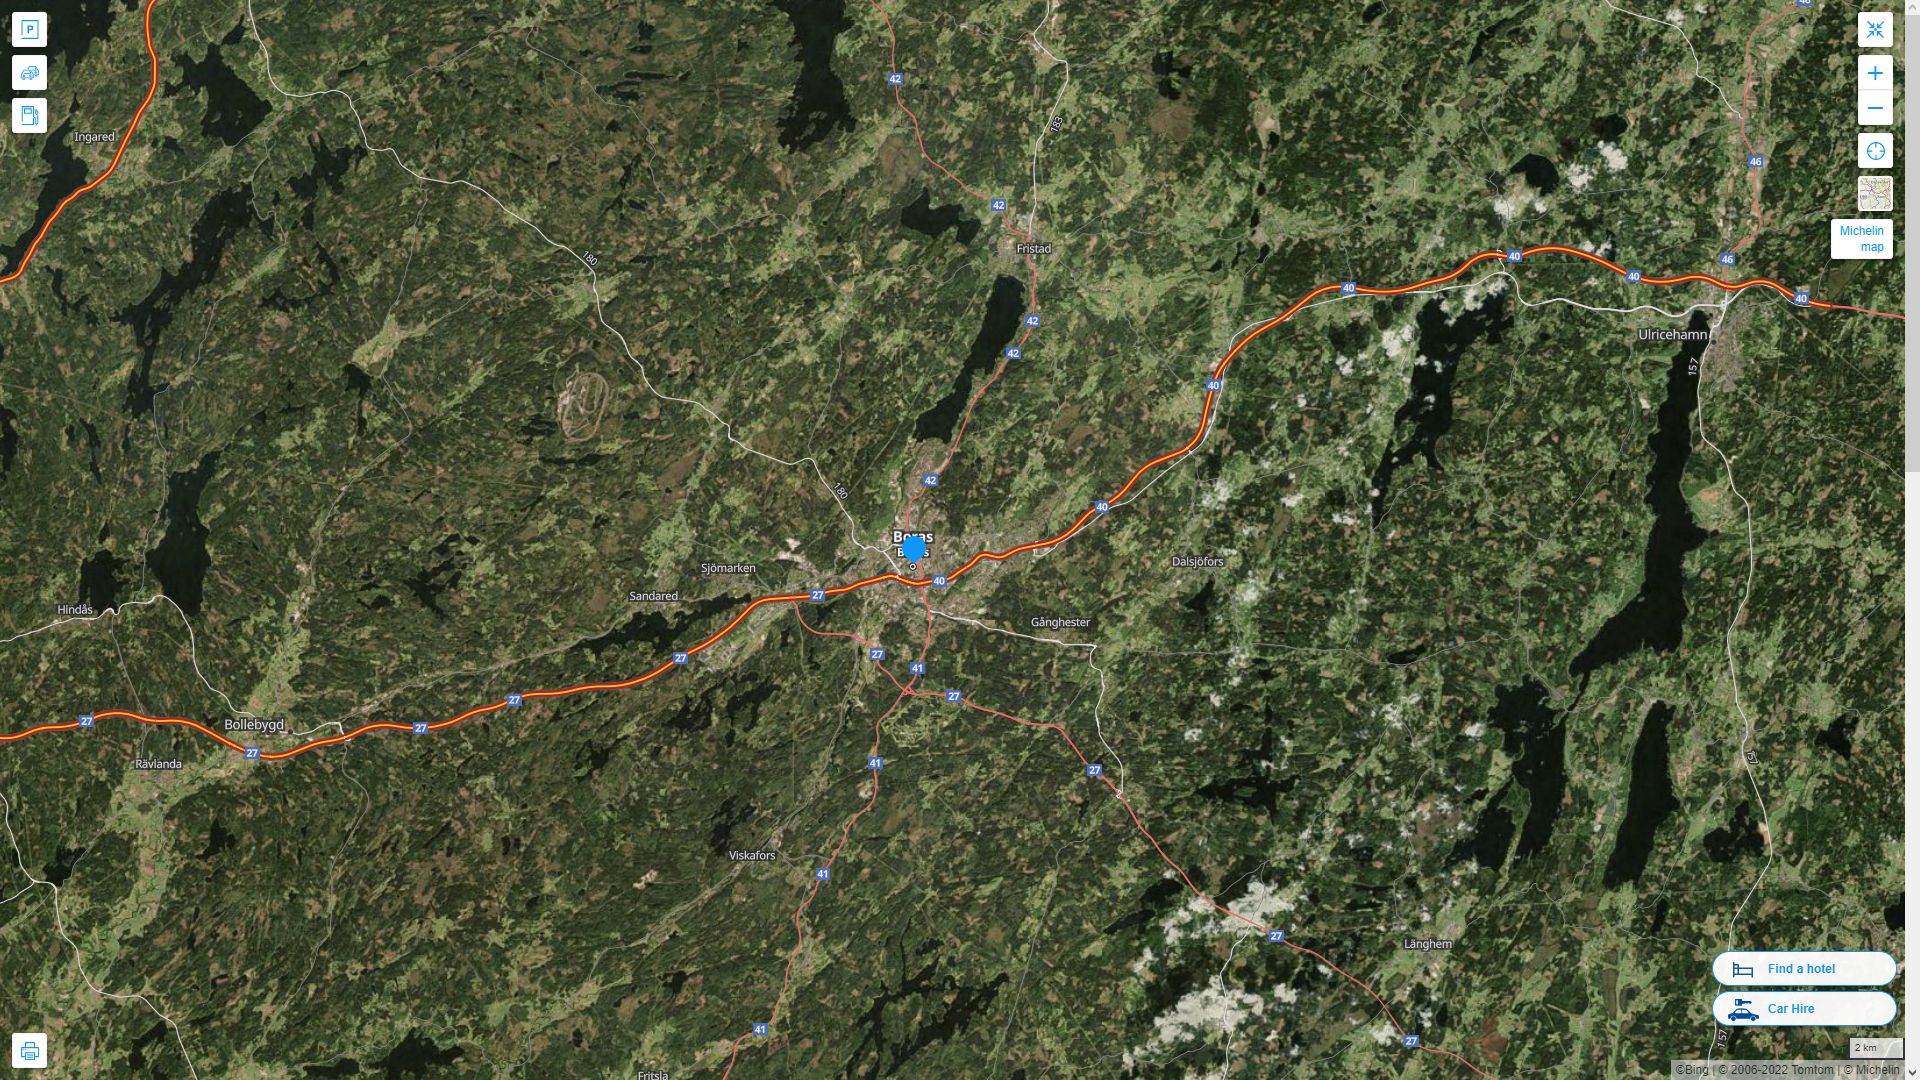 Boras Highway and Road Map with Satellite View